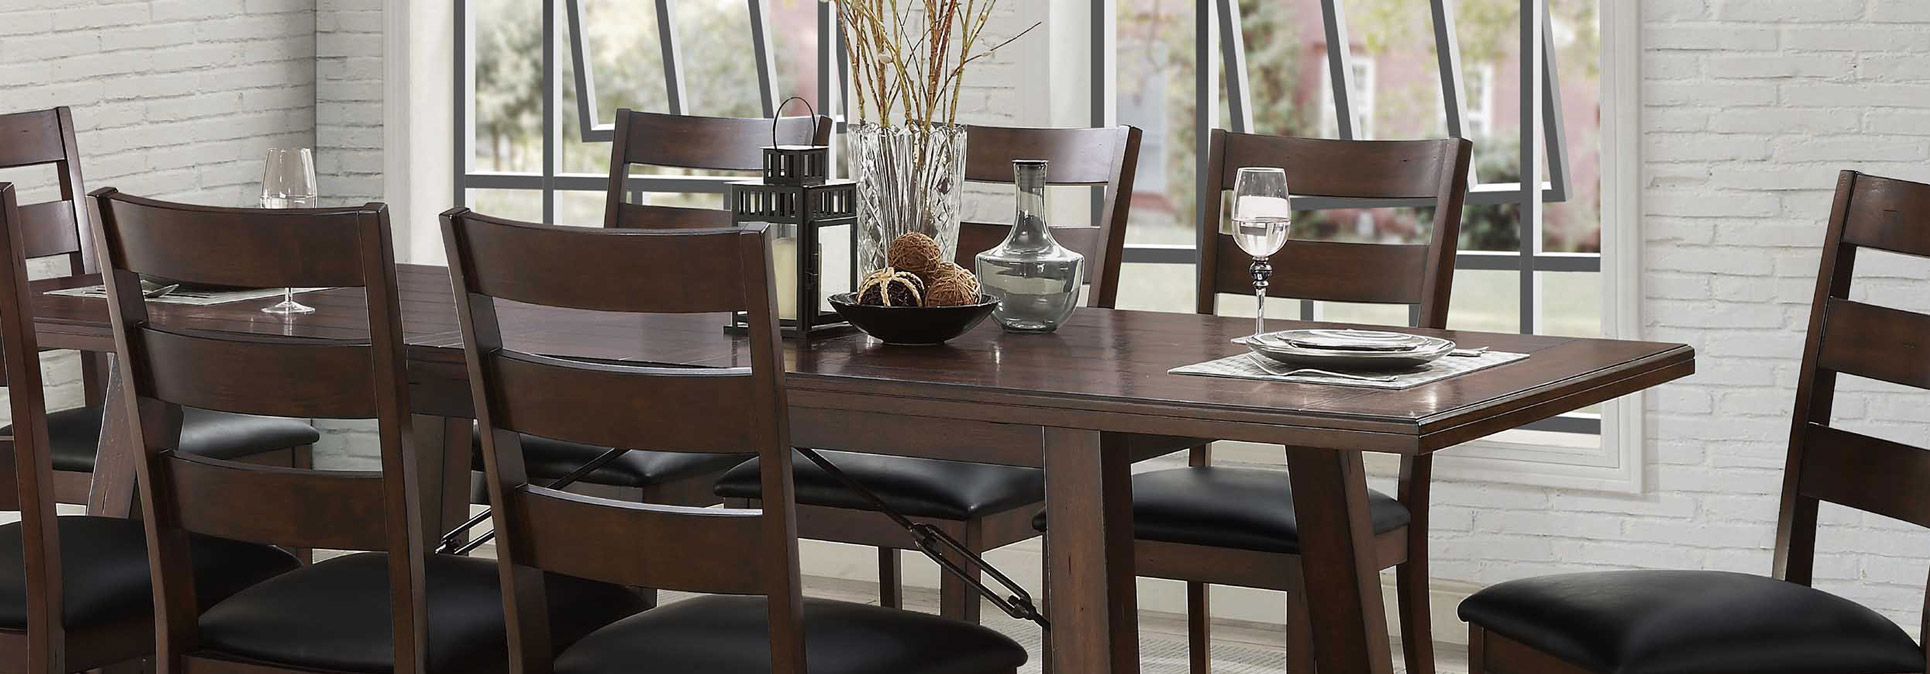 Bayside Furnishings, Bayside By Whalen Dining Chairs